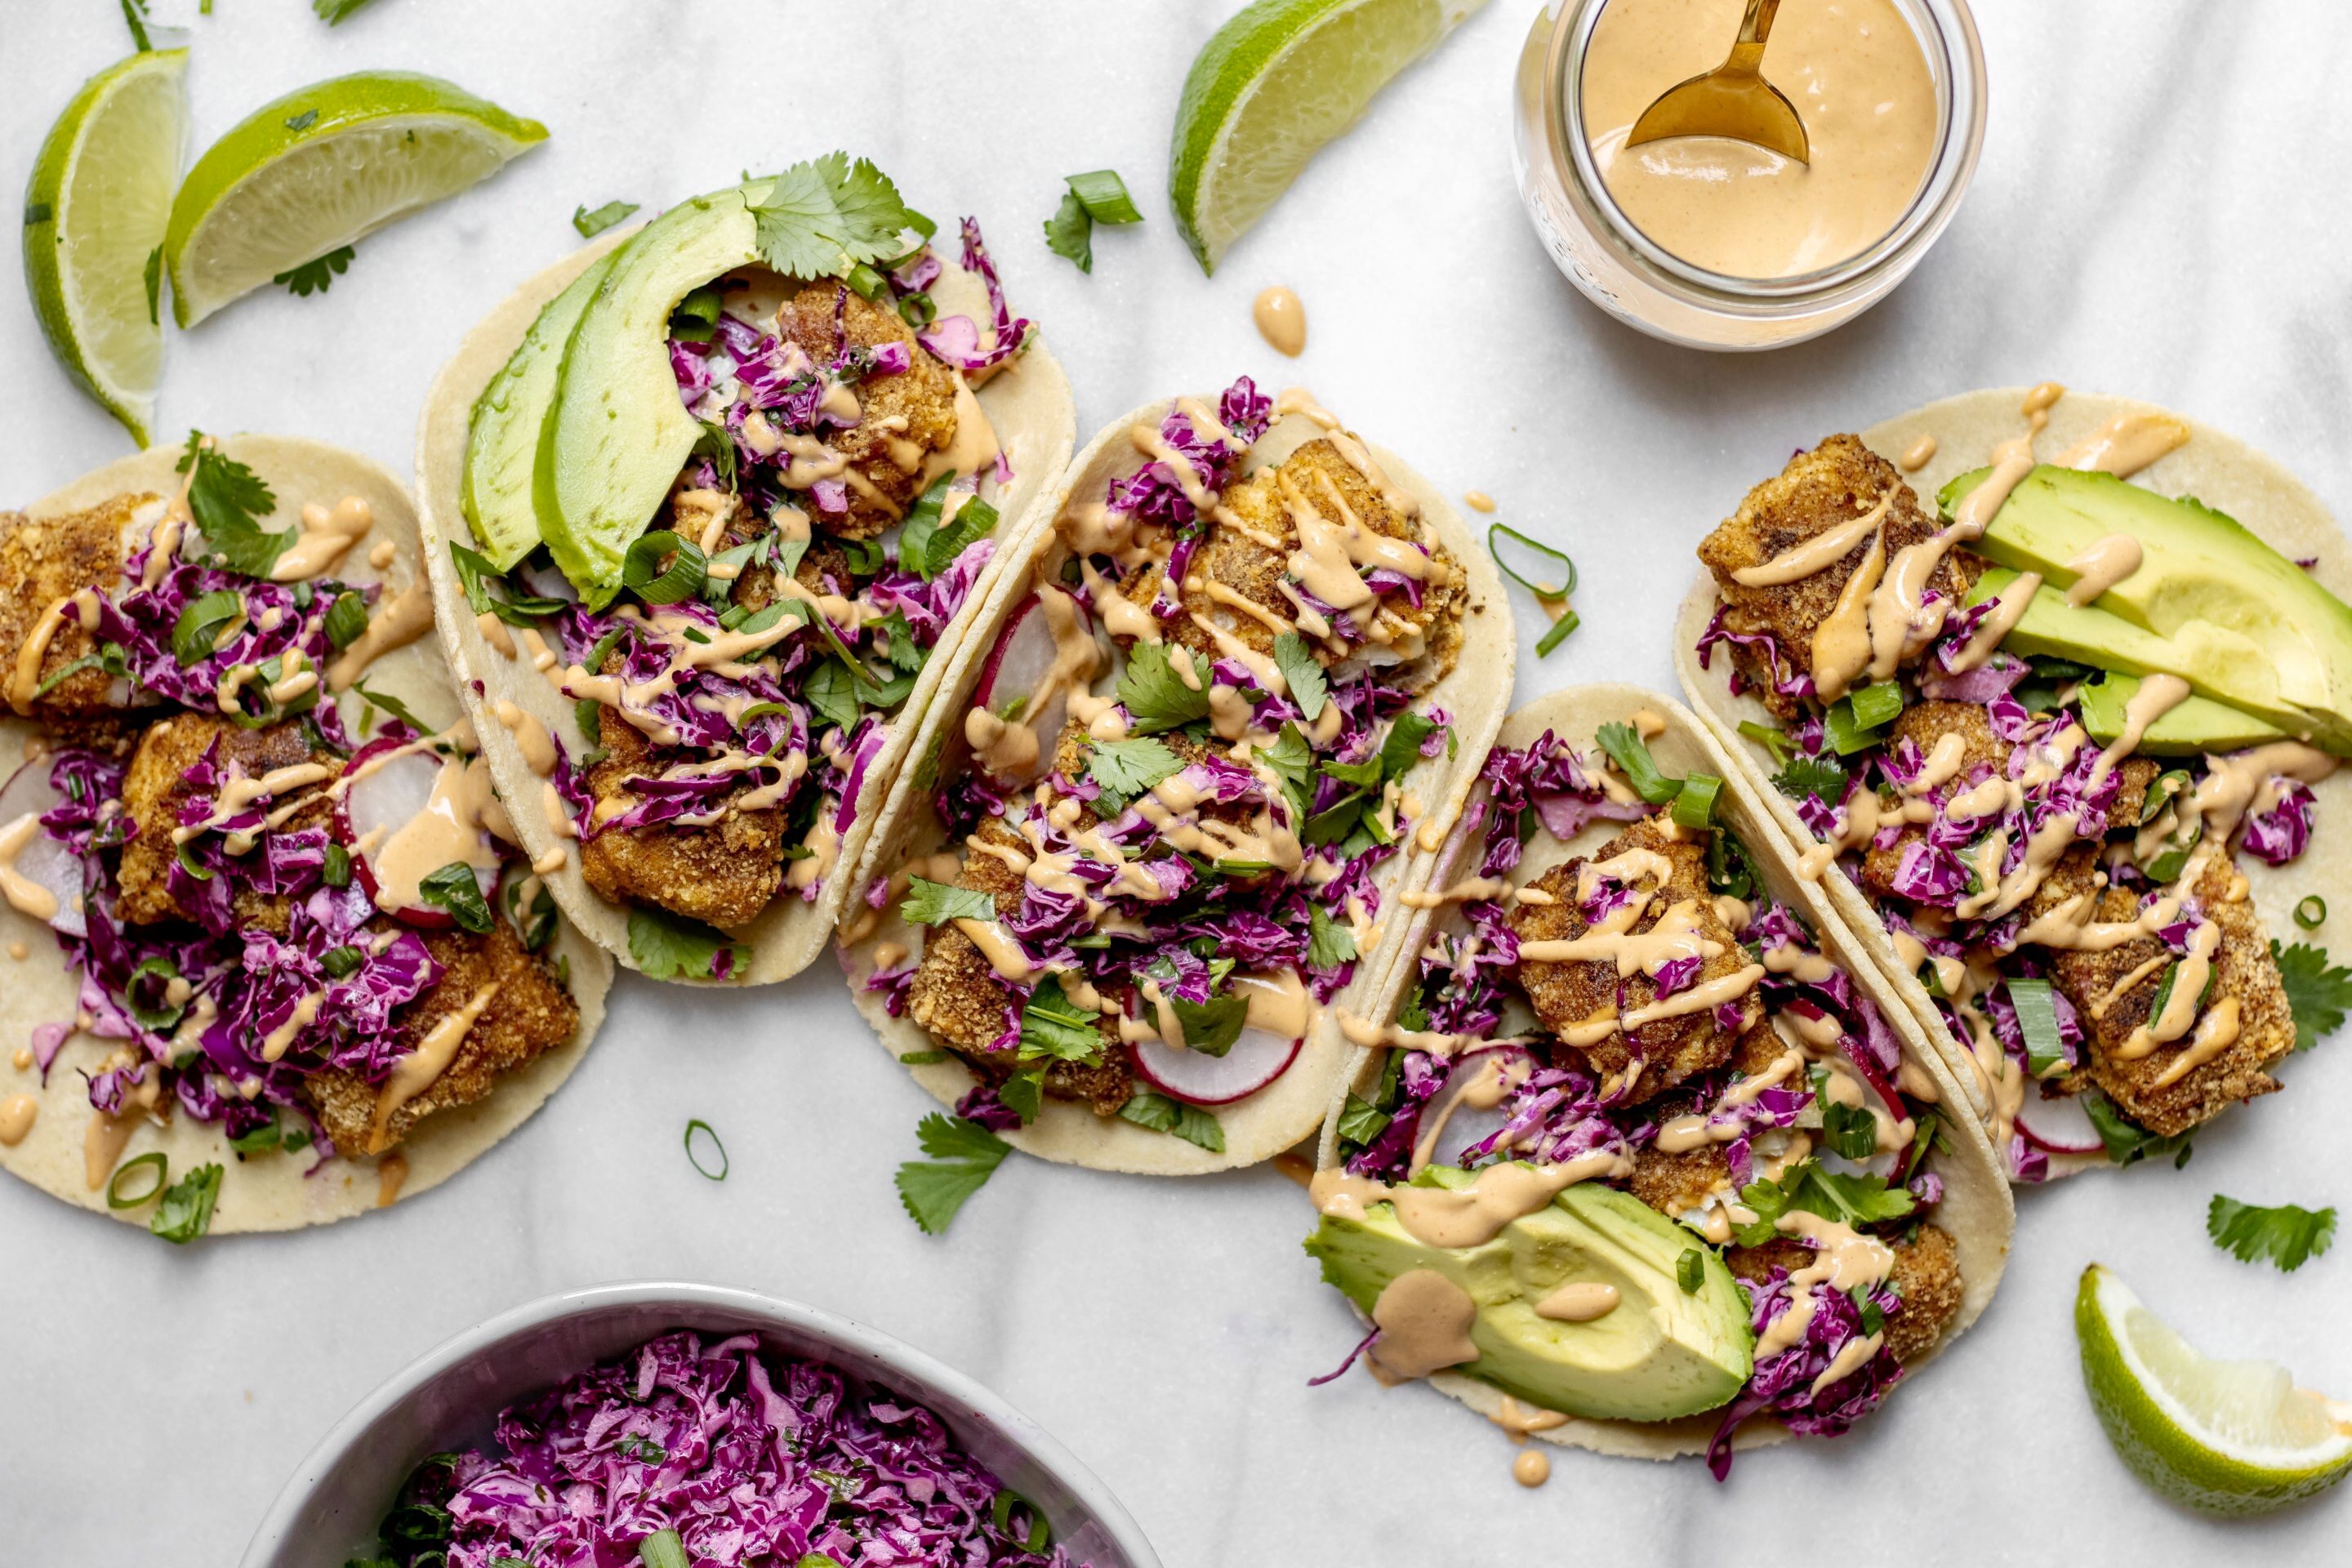 crispy-baked-fish-tacos-with-cilantro-lime-cabbage-slaw